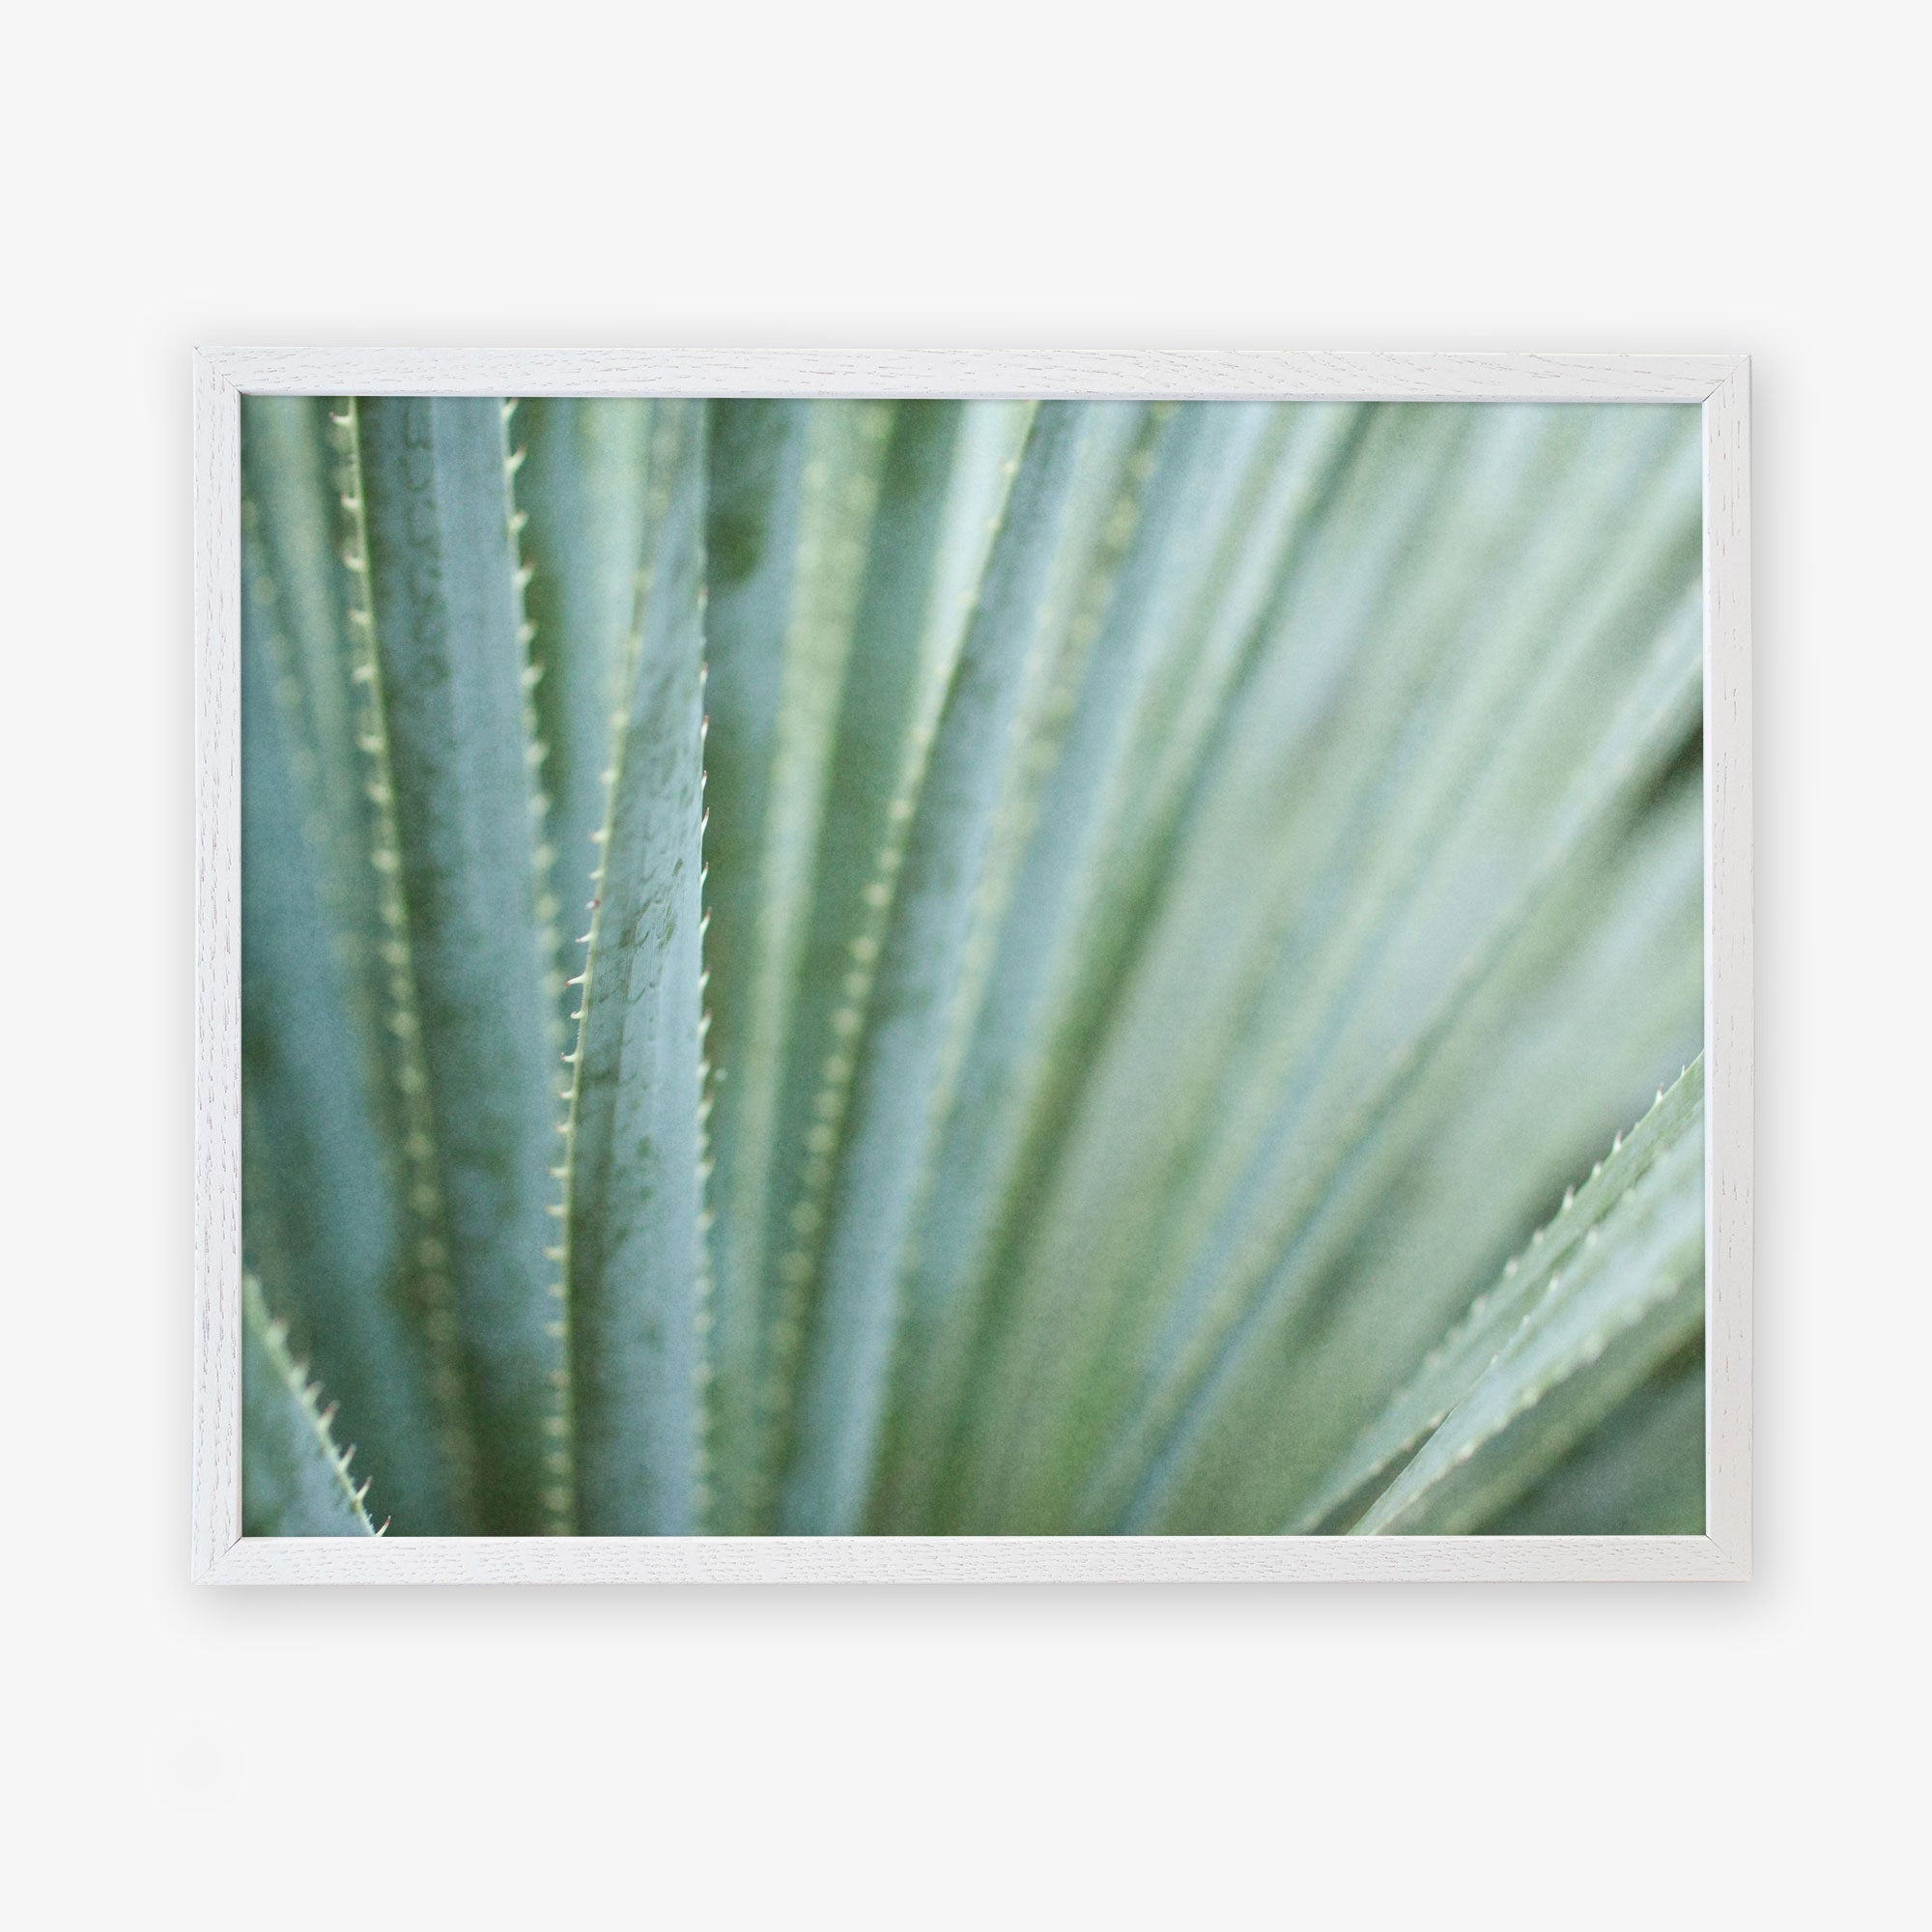 A close-up photo of a green agave plant, showing its pointed, serrated leaves, printed on archival photographic paper. 

becomes

An Abstract Green Botanical Print, &#39;Strands and Spikes&#39; by Offley Green, showcasing a green agave plant with pointed, serrated leaves.